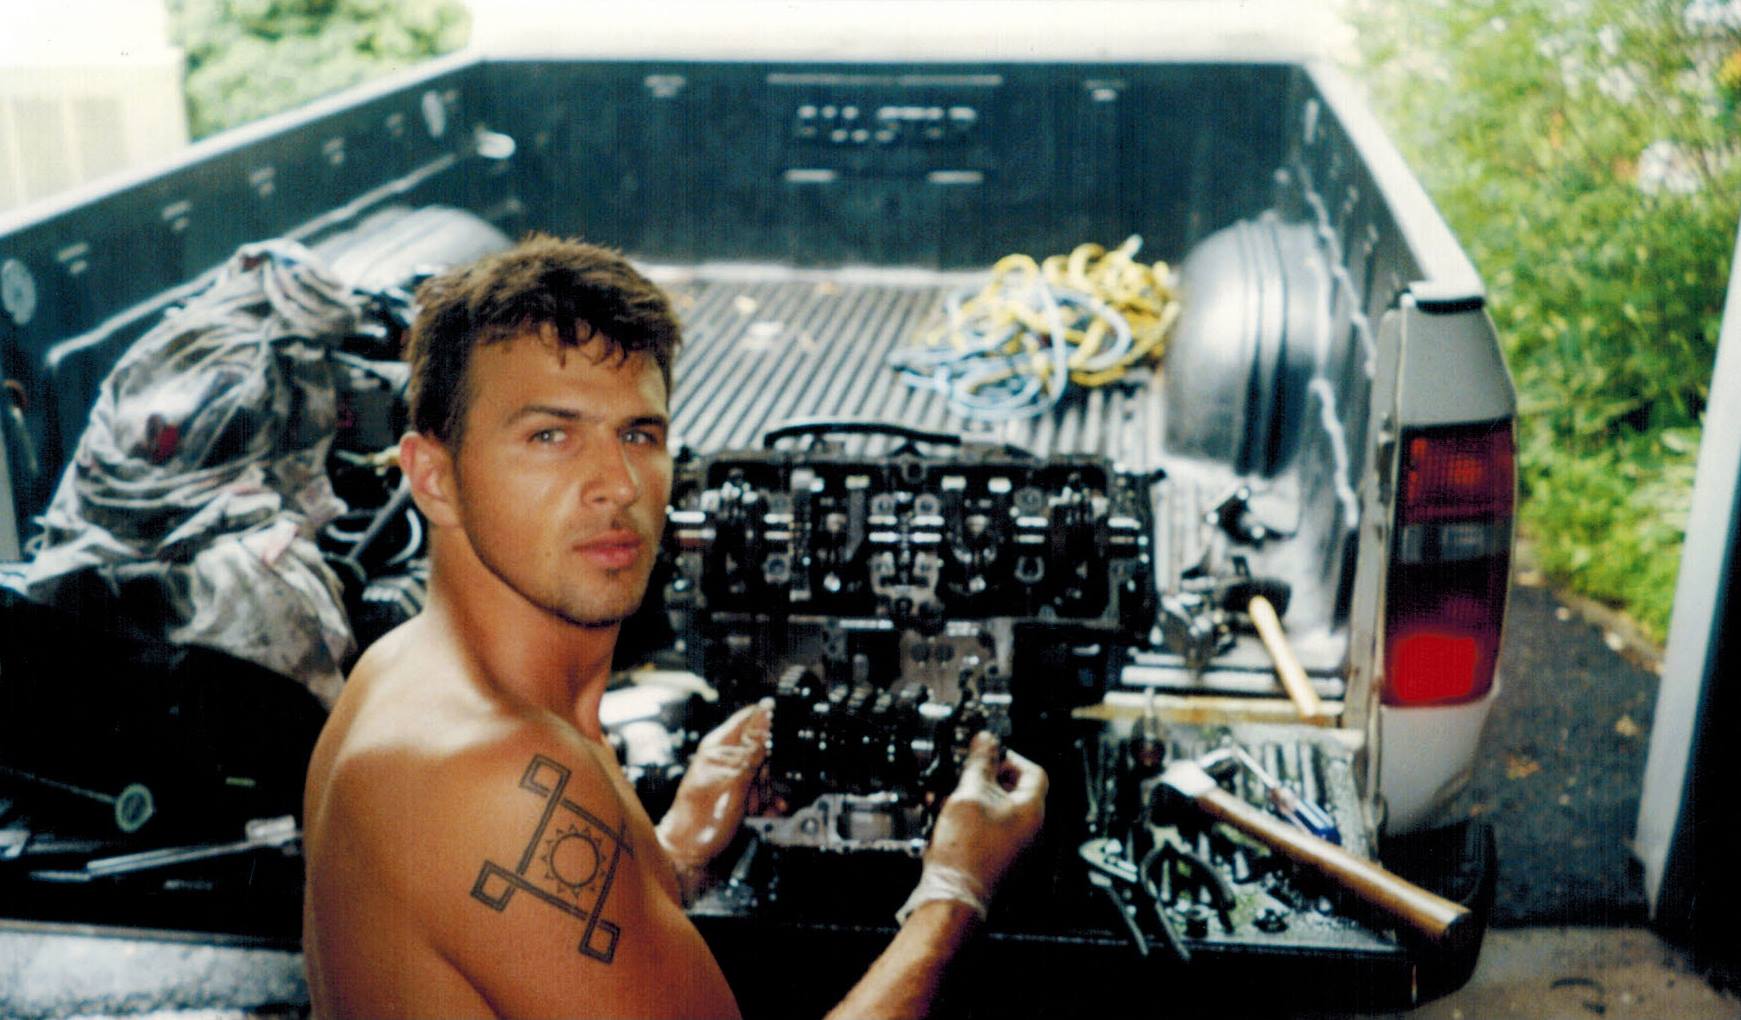 Founder of TST Industries, Bart Rogowski, working on a motorcycle engine when he was young.